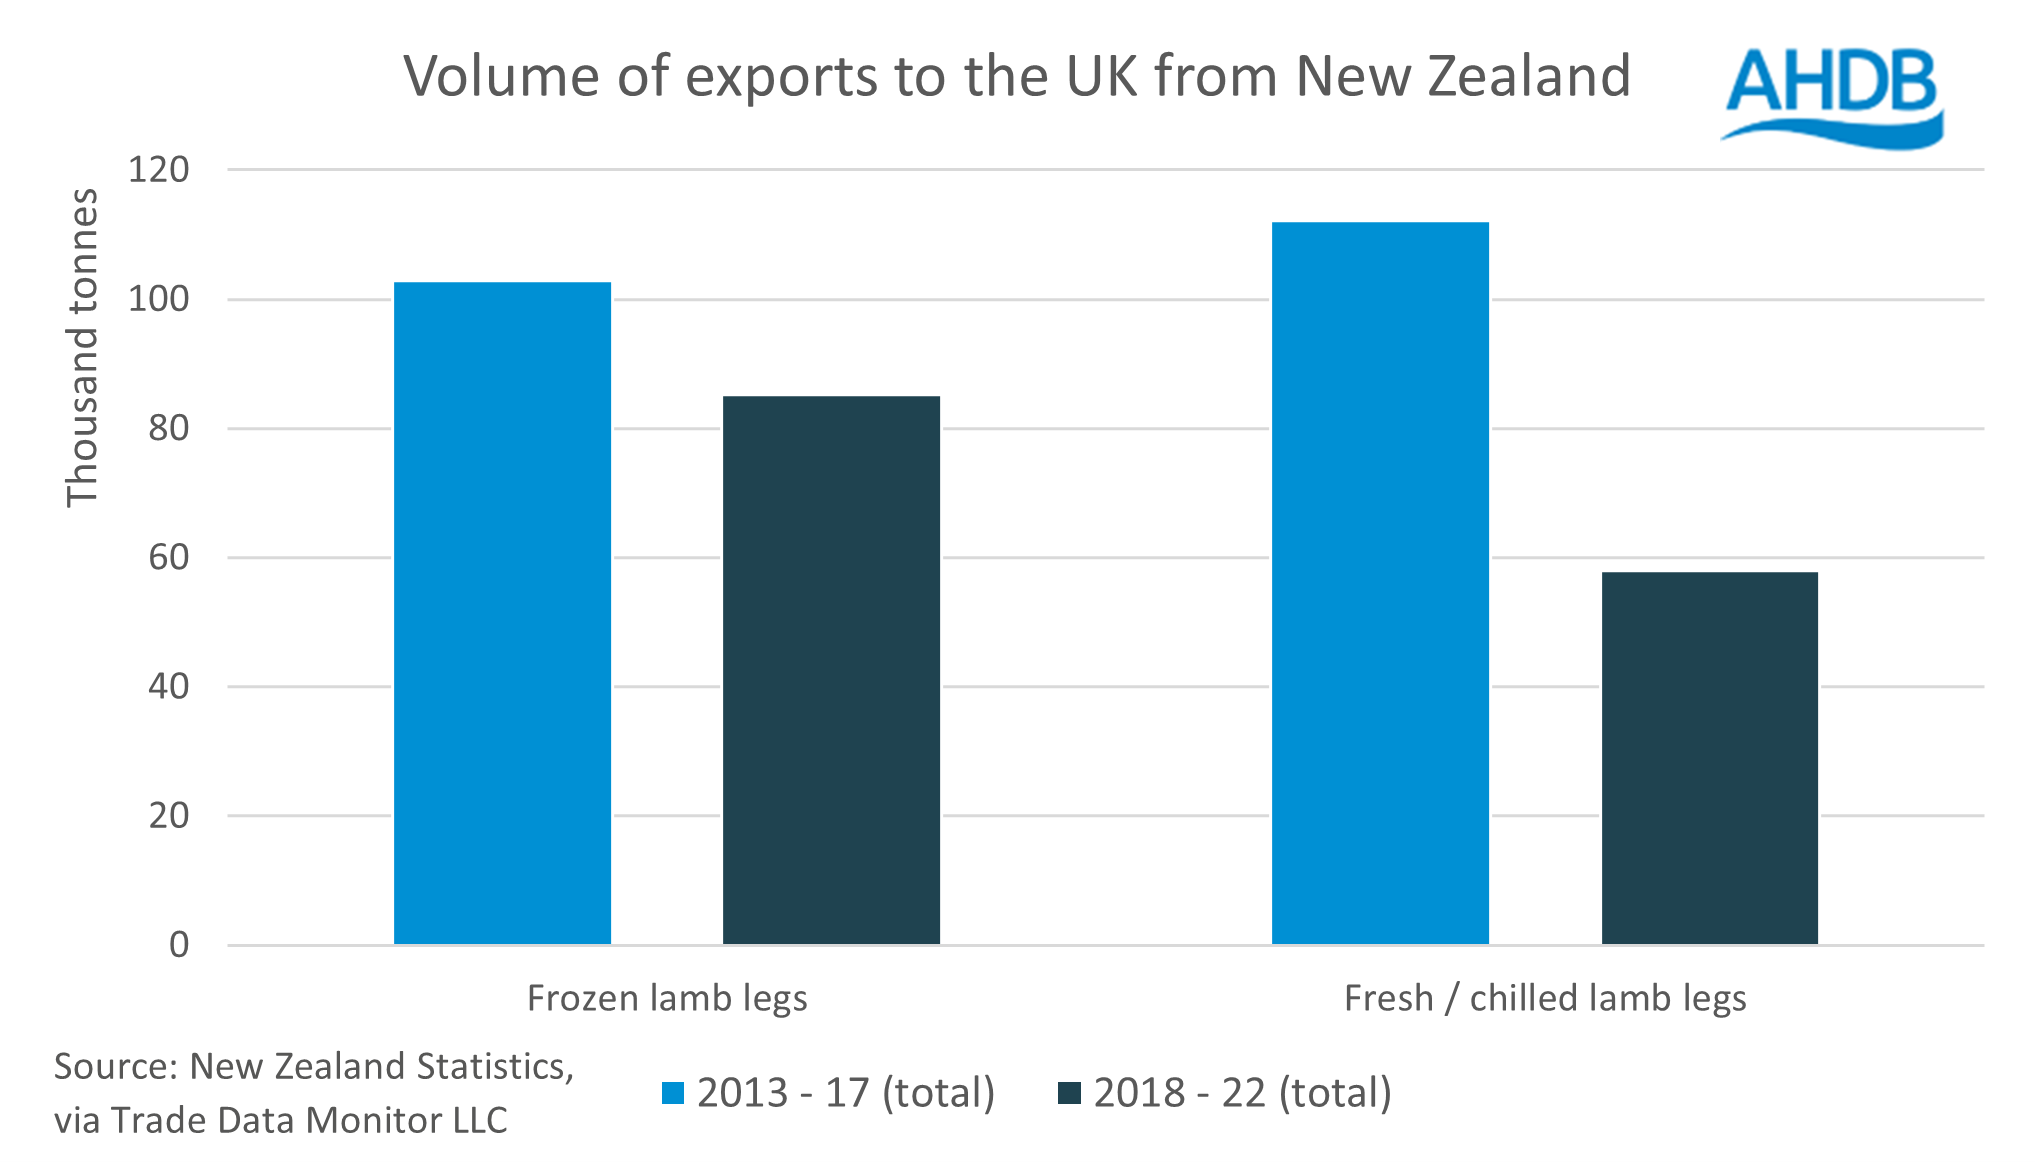 graph showing volumes and products exported from New Zealand to UK from 2013 - 2022